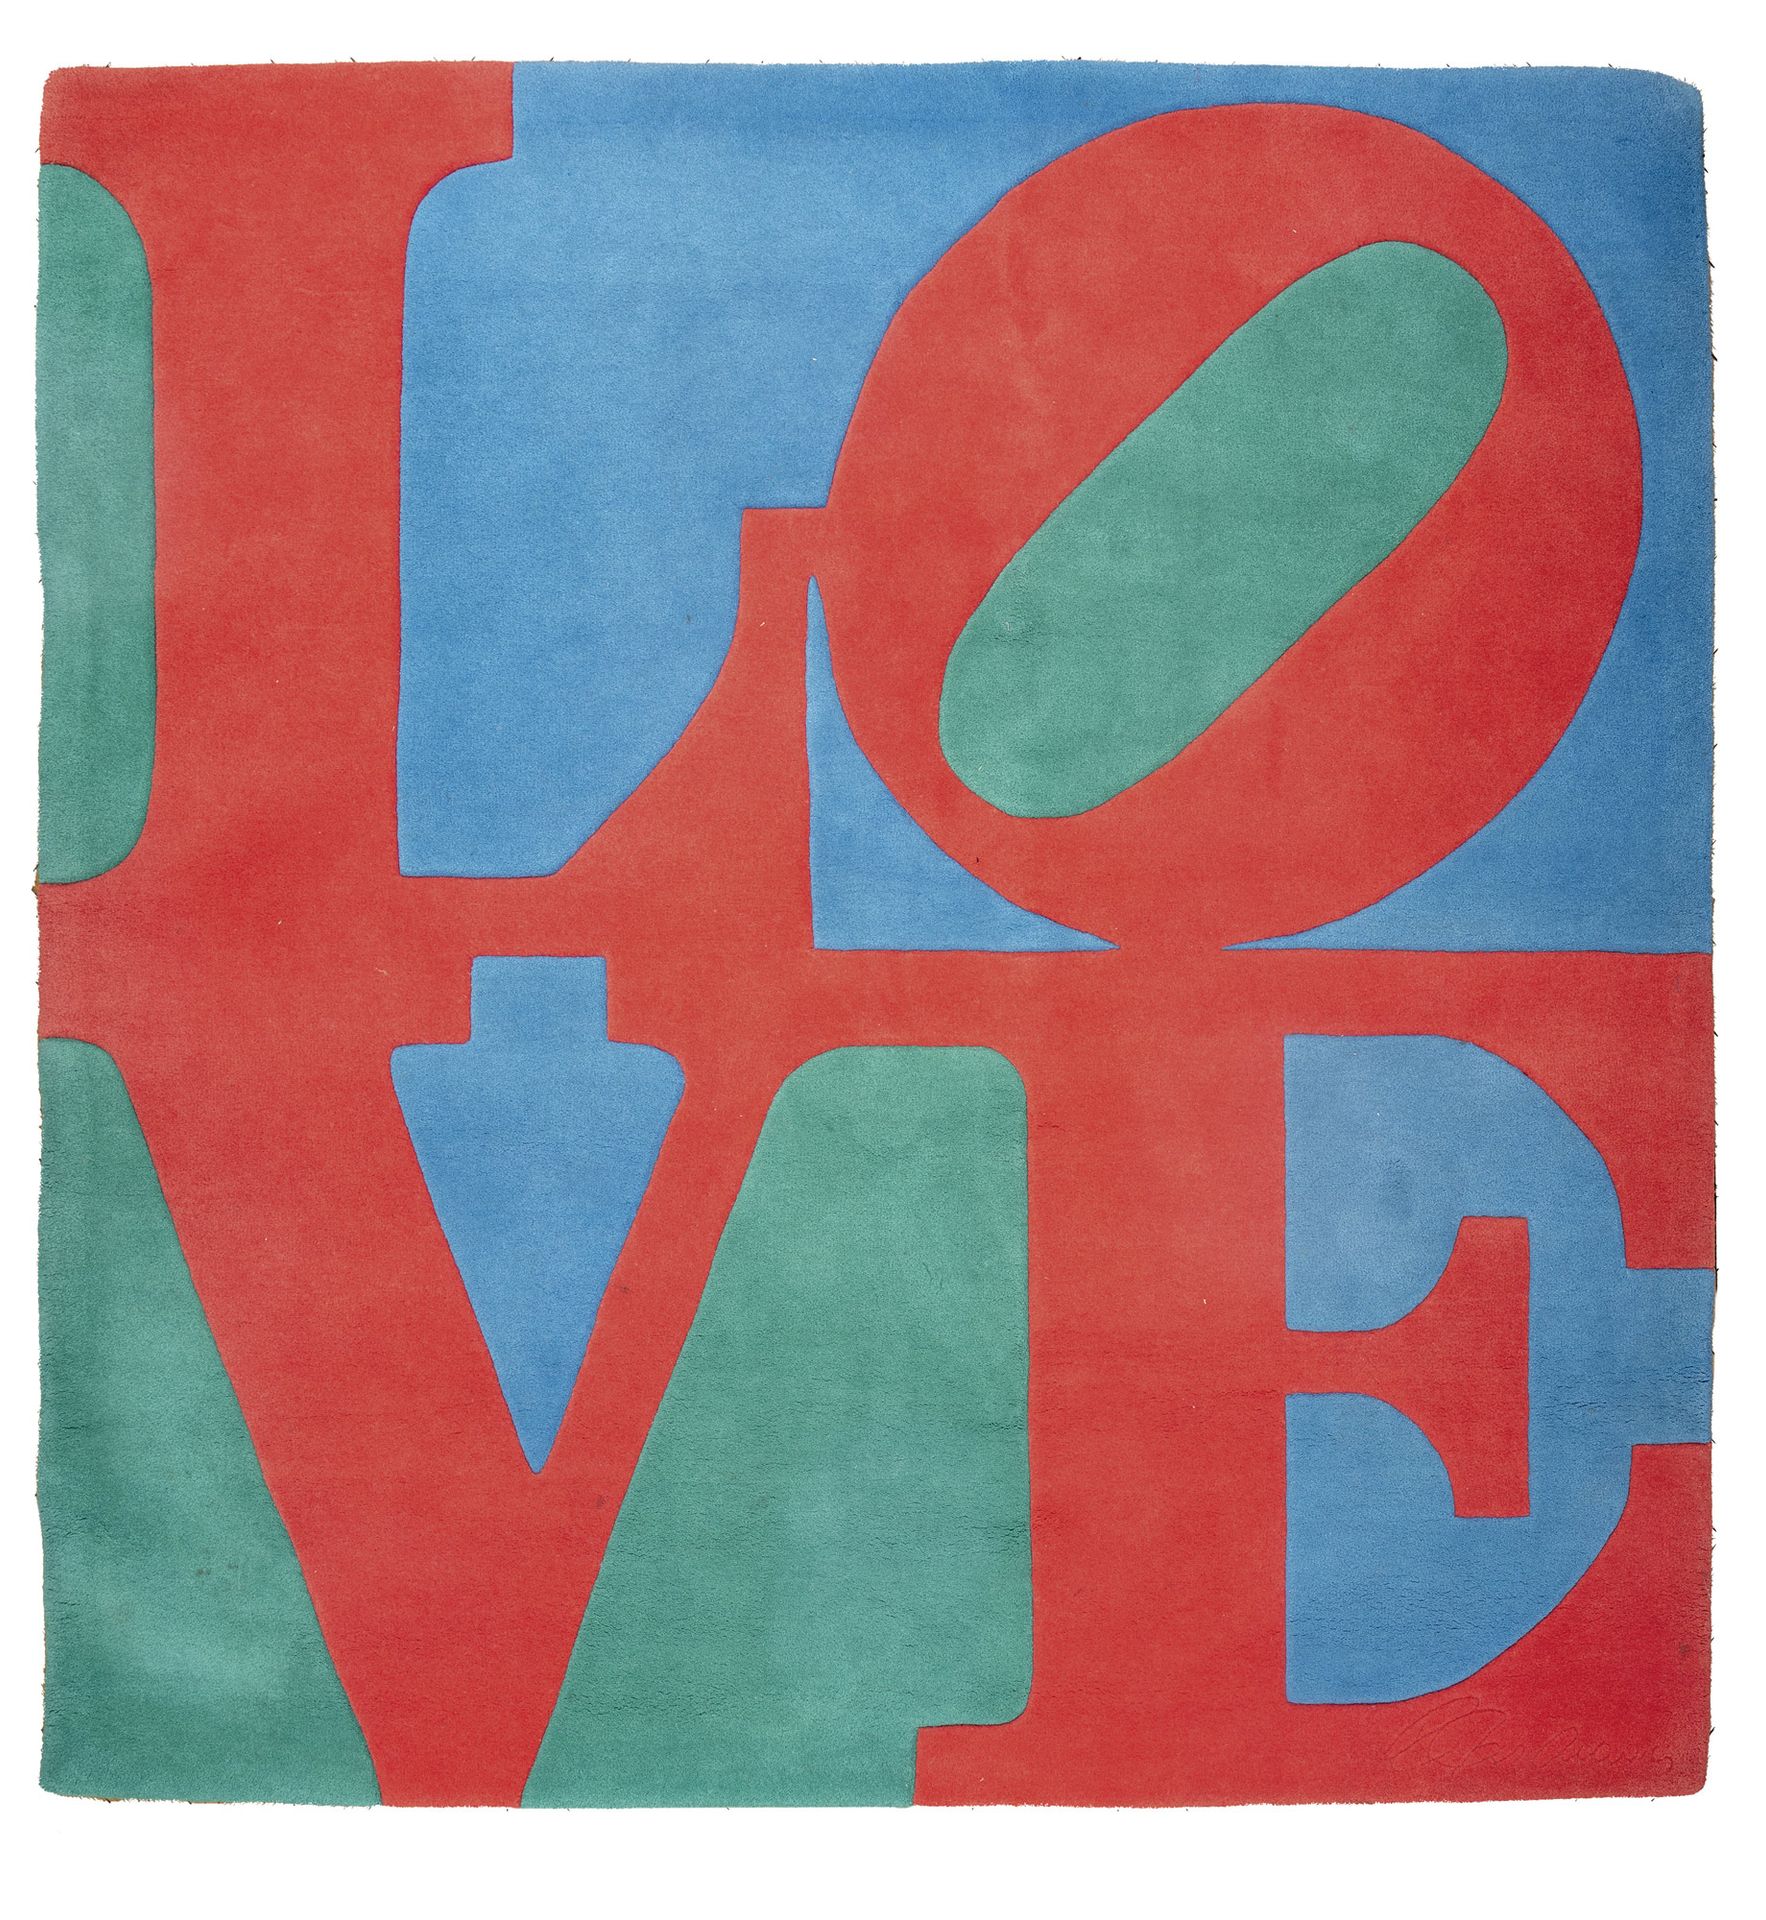 Robert INDIANA (d'après) (1928-2018) CLASSIC LOVE, 1995
Hand-woven wool rug
Sign&hellip;